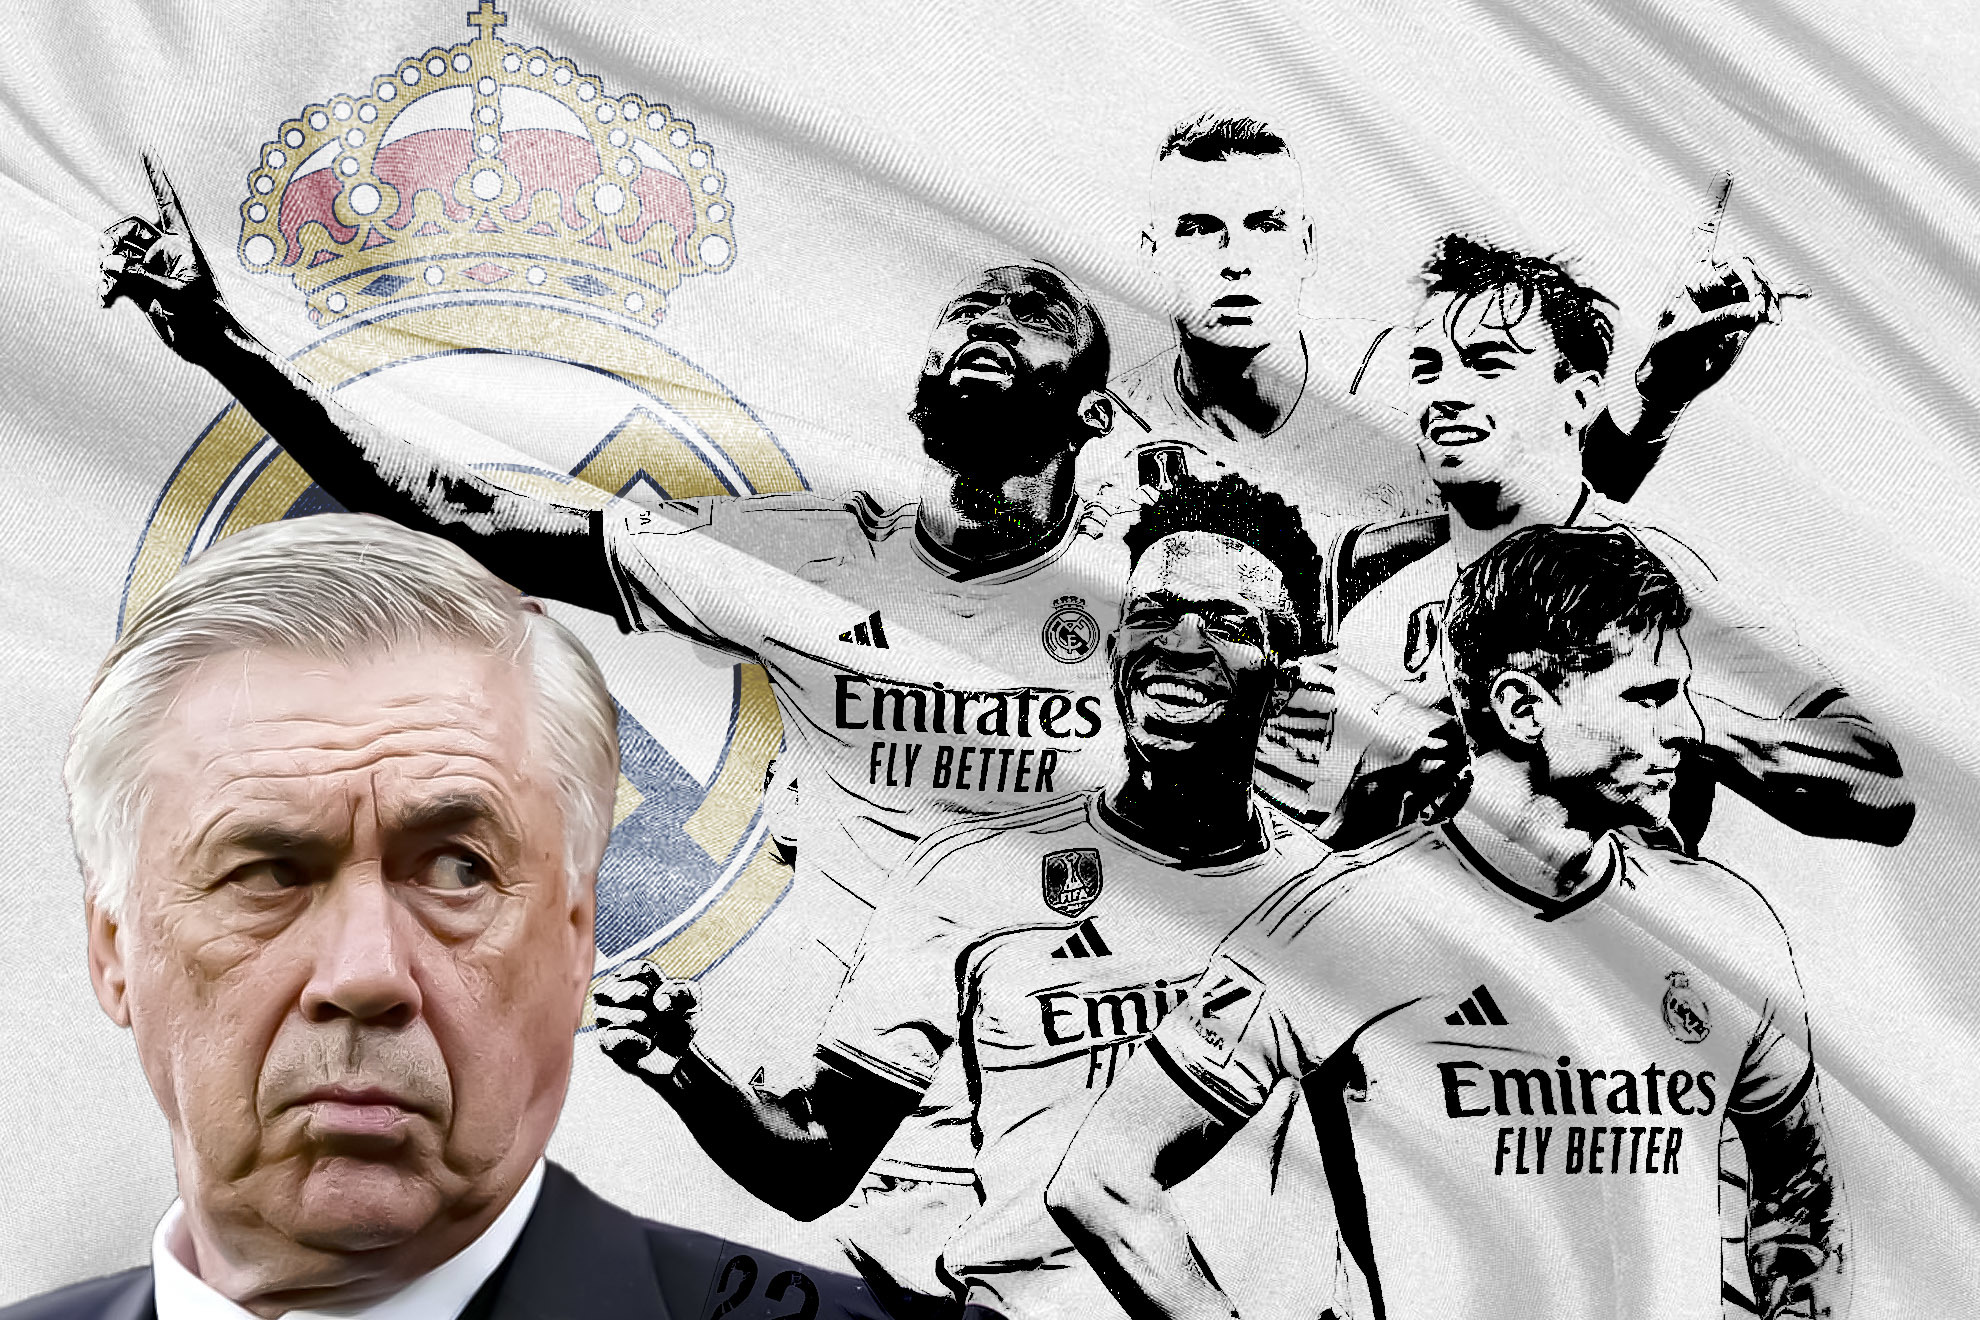 Carlo Ancelotti sends a message: Real Madrid is stronger than ever